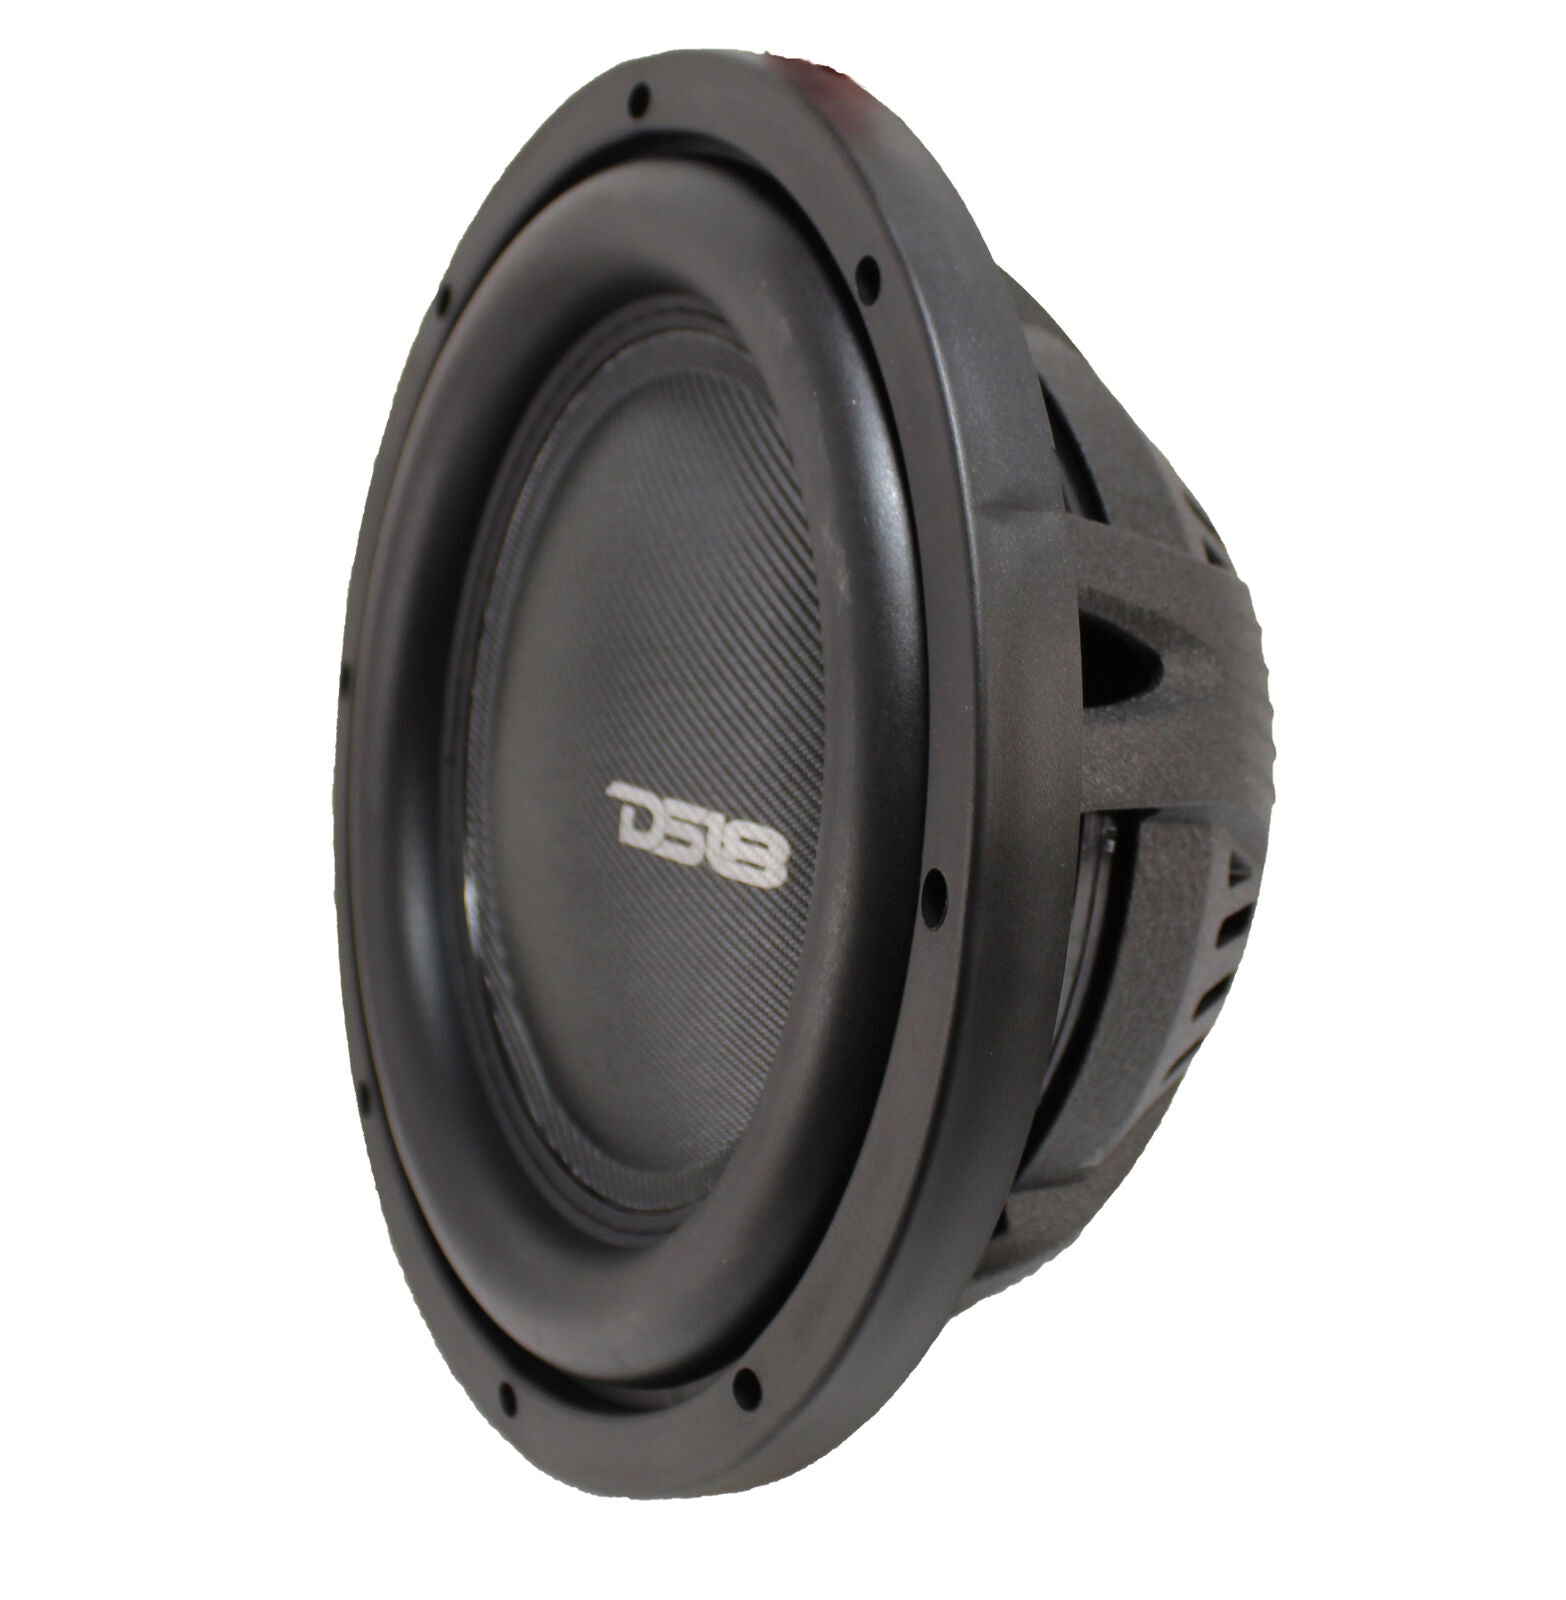 Audiopipe Shallow 12 Subwoofer DVC 4 ohm 800 Watts Max-